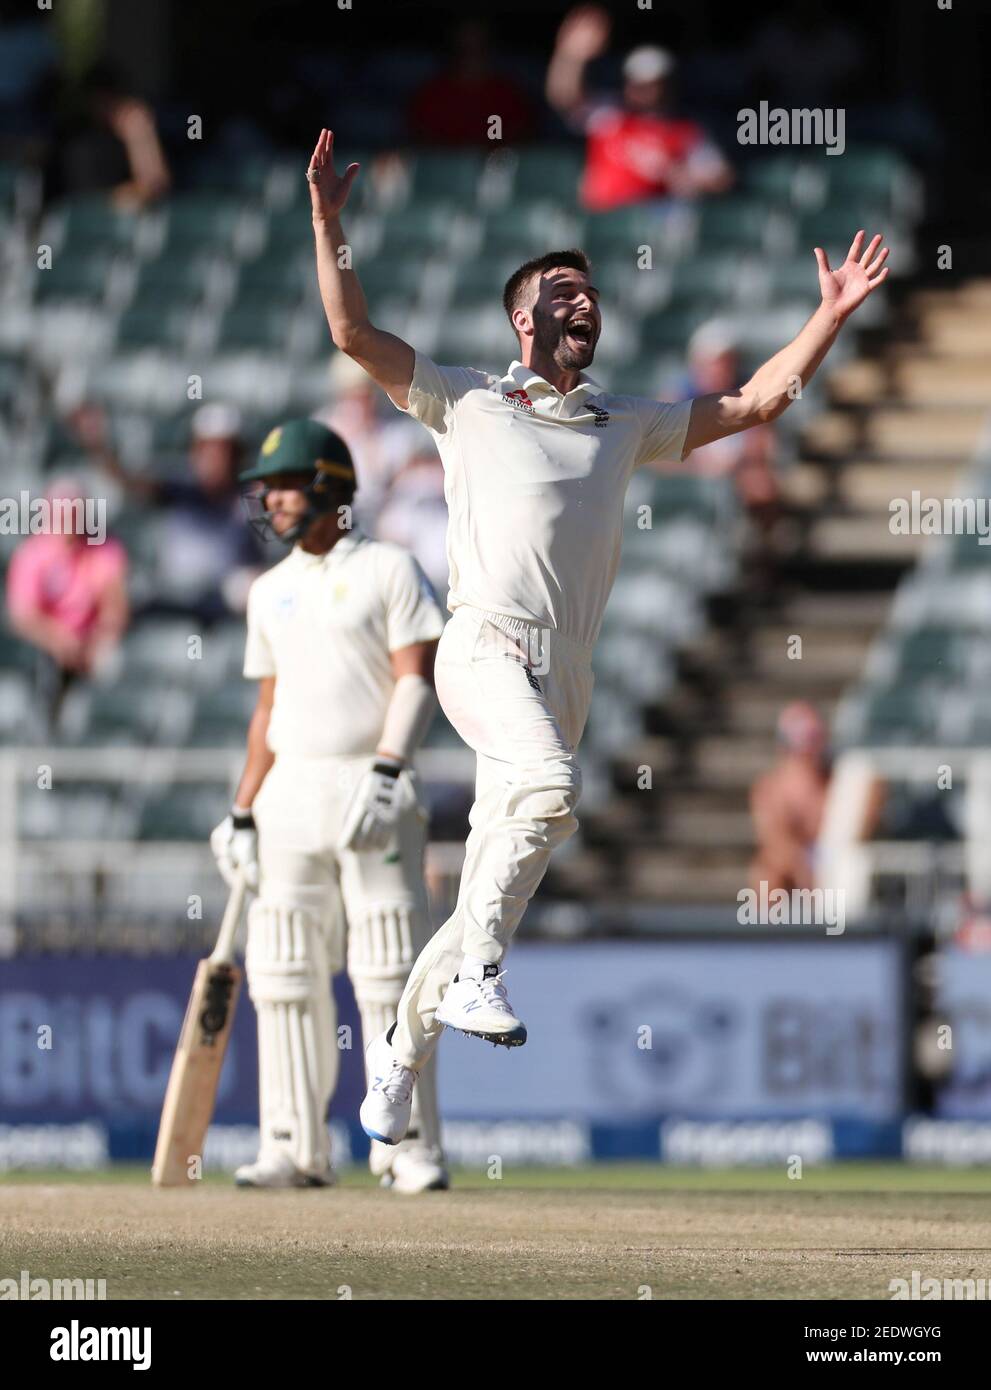 Cricket - South Africa v England - Fourth Test - Imperial Wanderers Stadium, Johannesburg, South Africa - January 27, 2020   England's Mark Wood celebrates taking the wicket of South Africa's Anrich Nortje      REUTERS/Siphiwe Sibeko Stock Photo